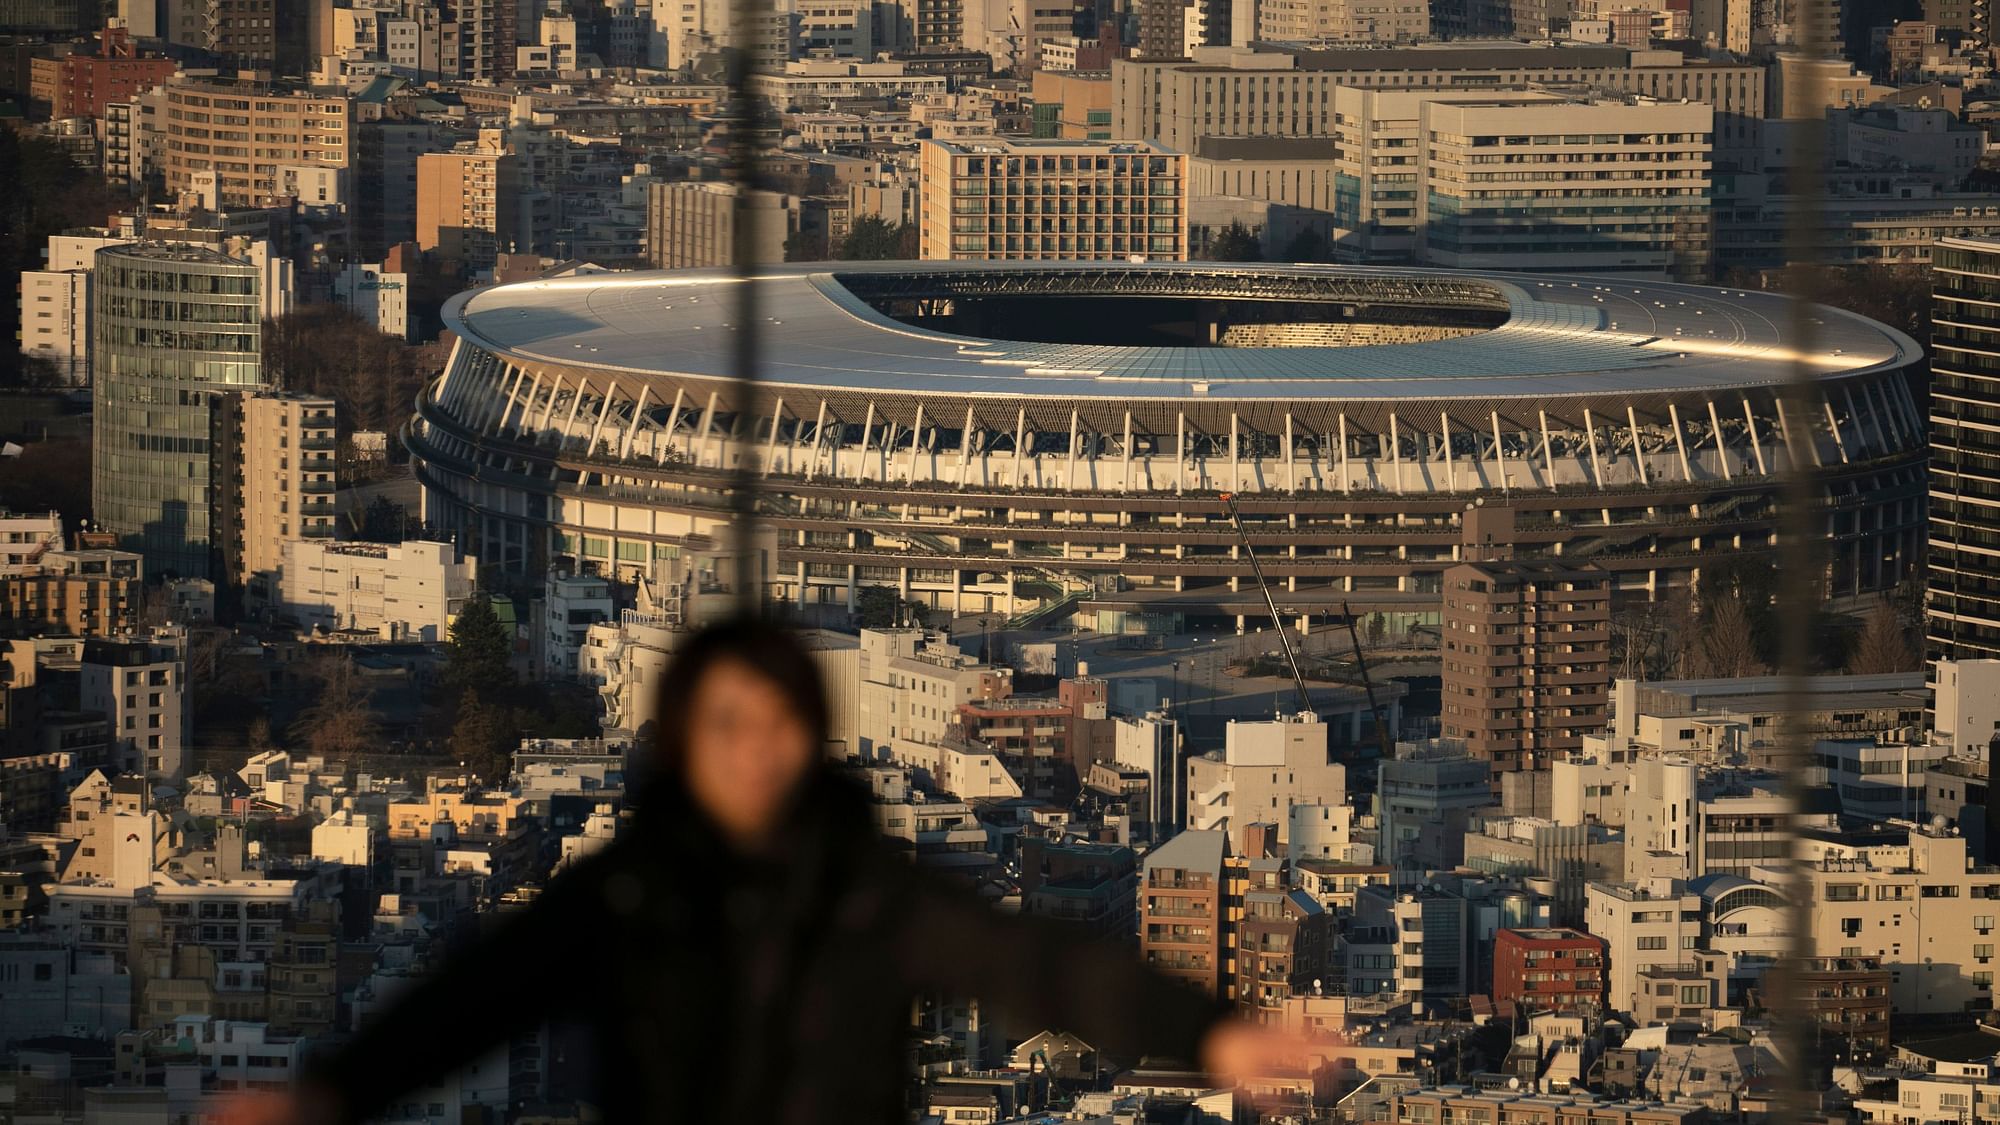 There are concerns about Tokyo’s weather and Russia’s participation ahead of the Olympics.